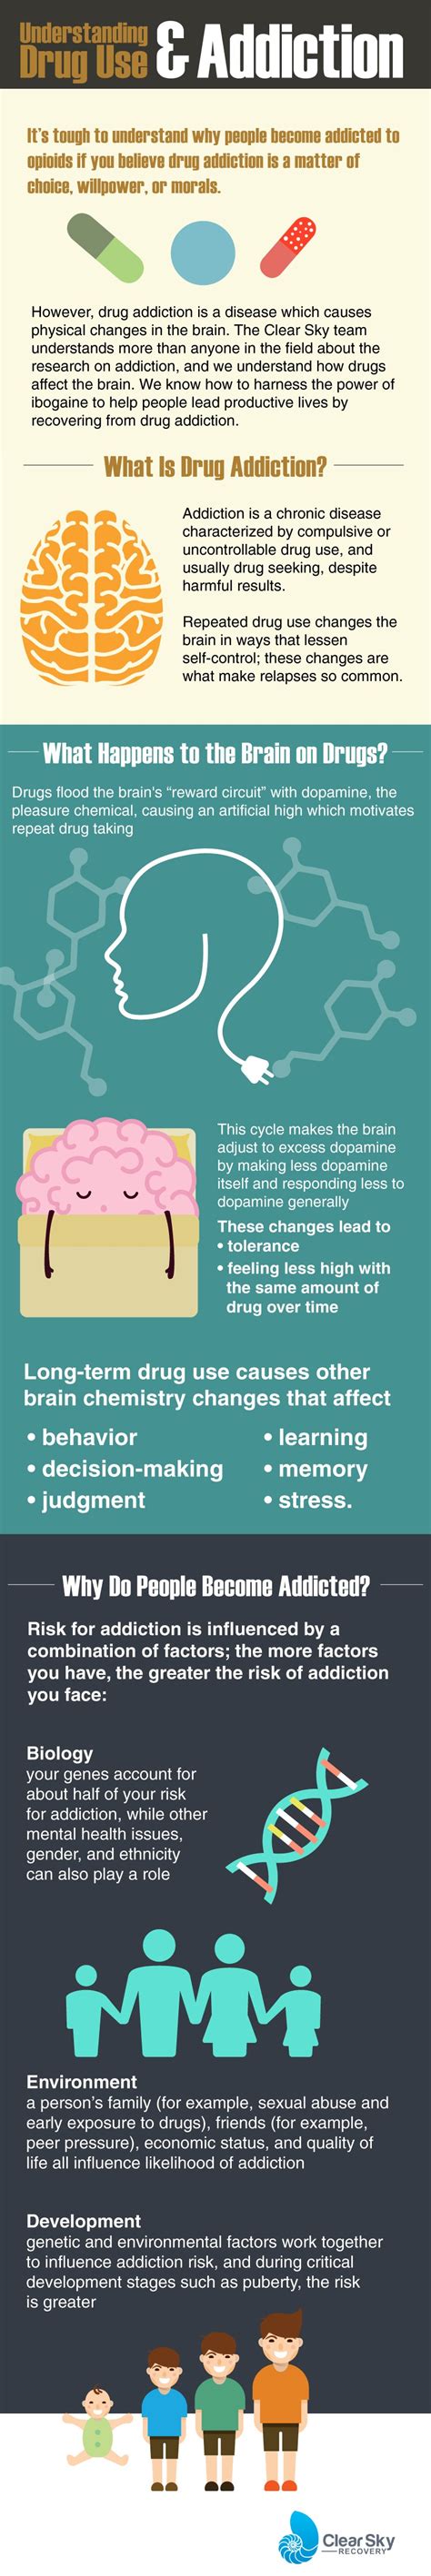 Understanding Drug Use And Addiction [infographic] Clear Sky Recovery